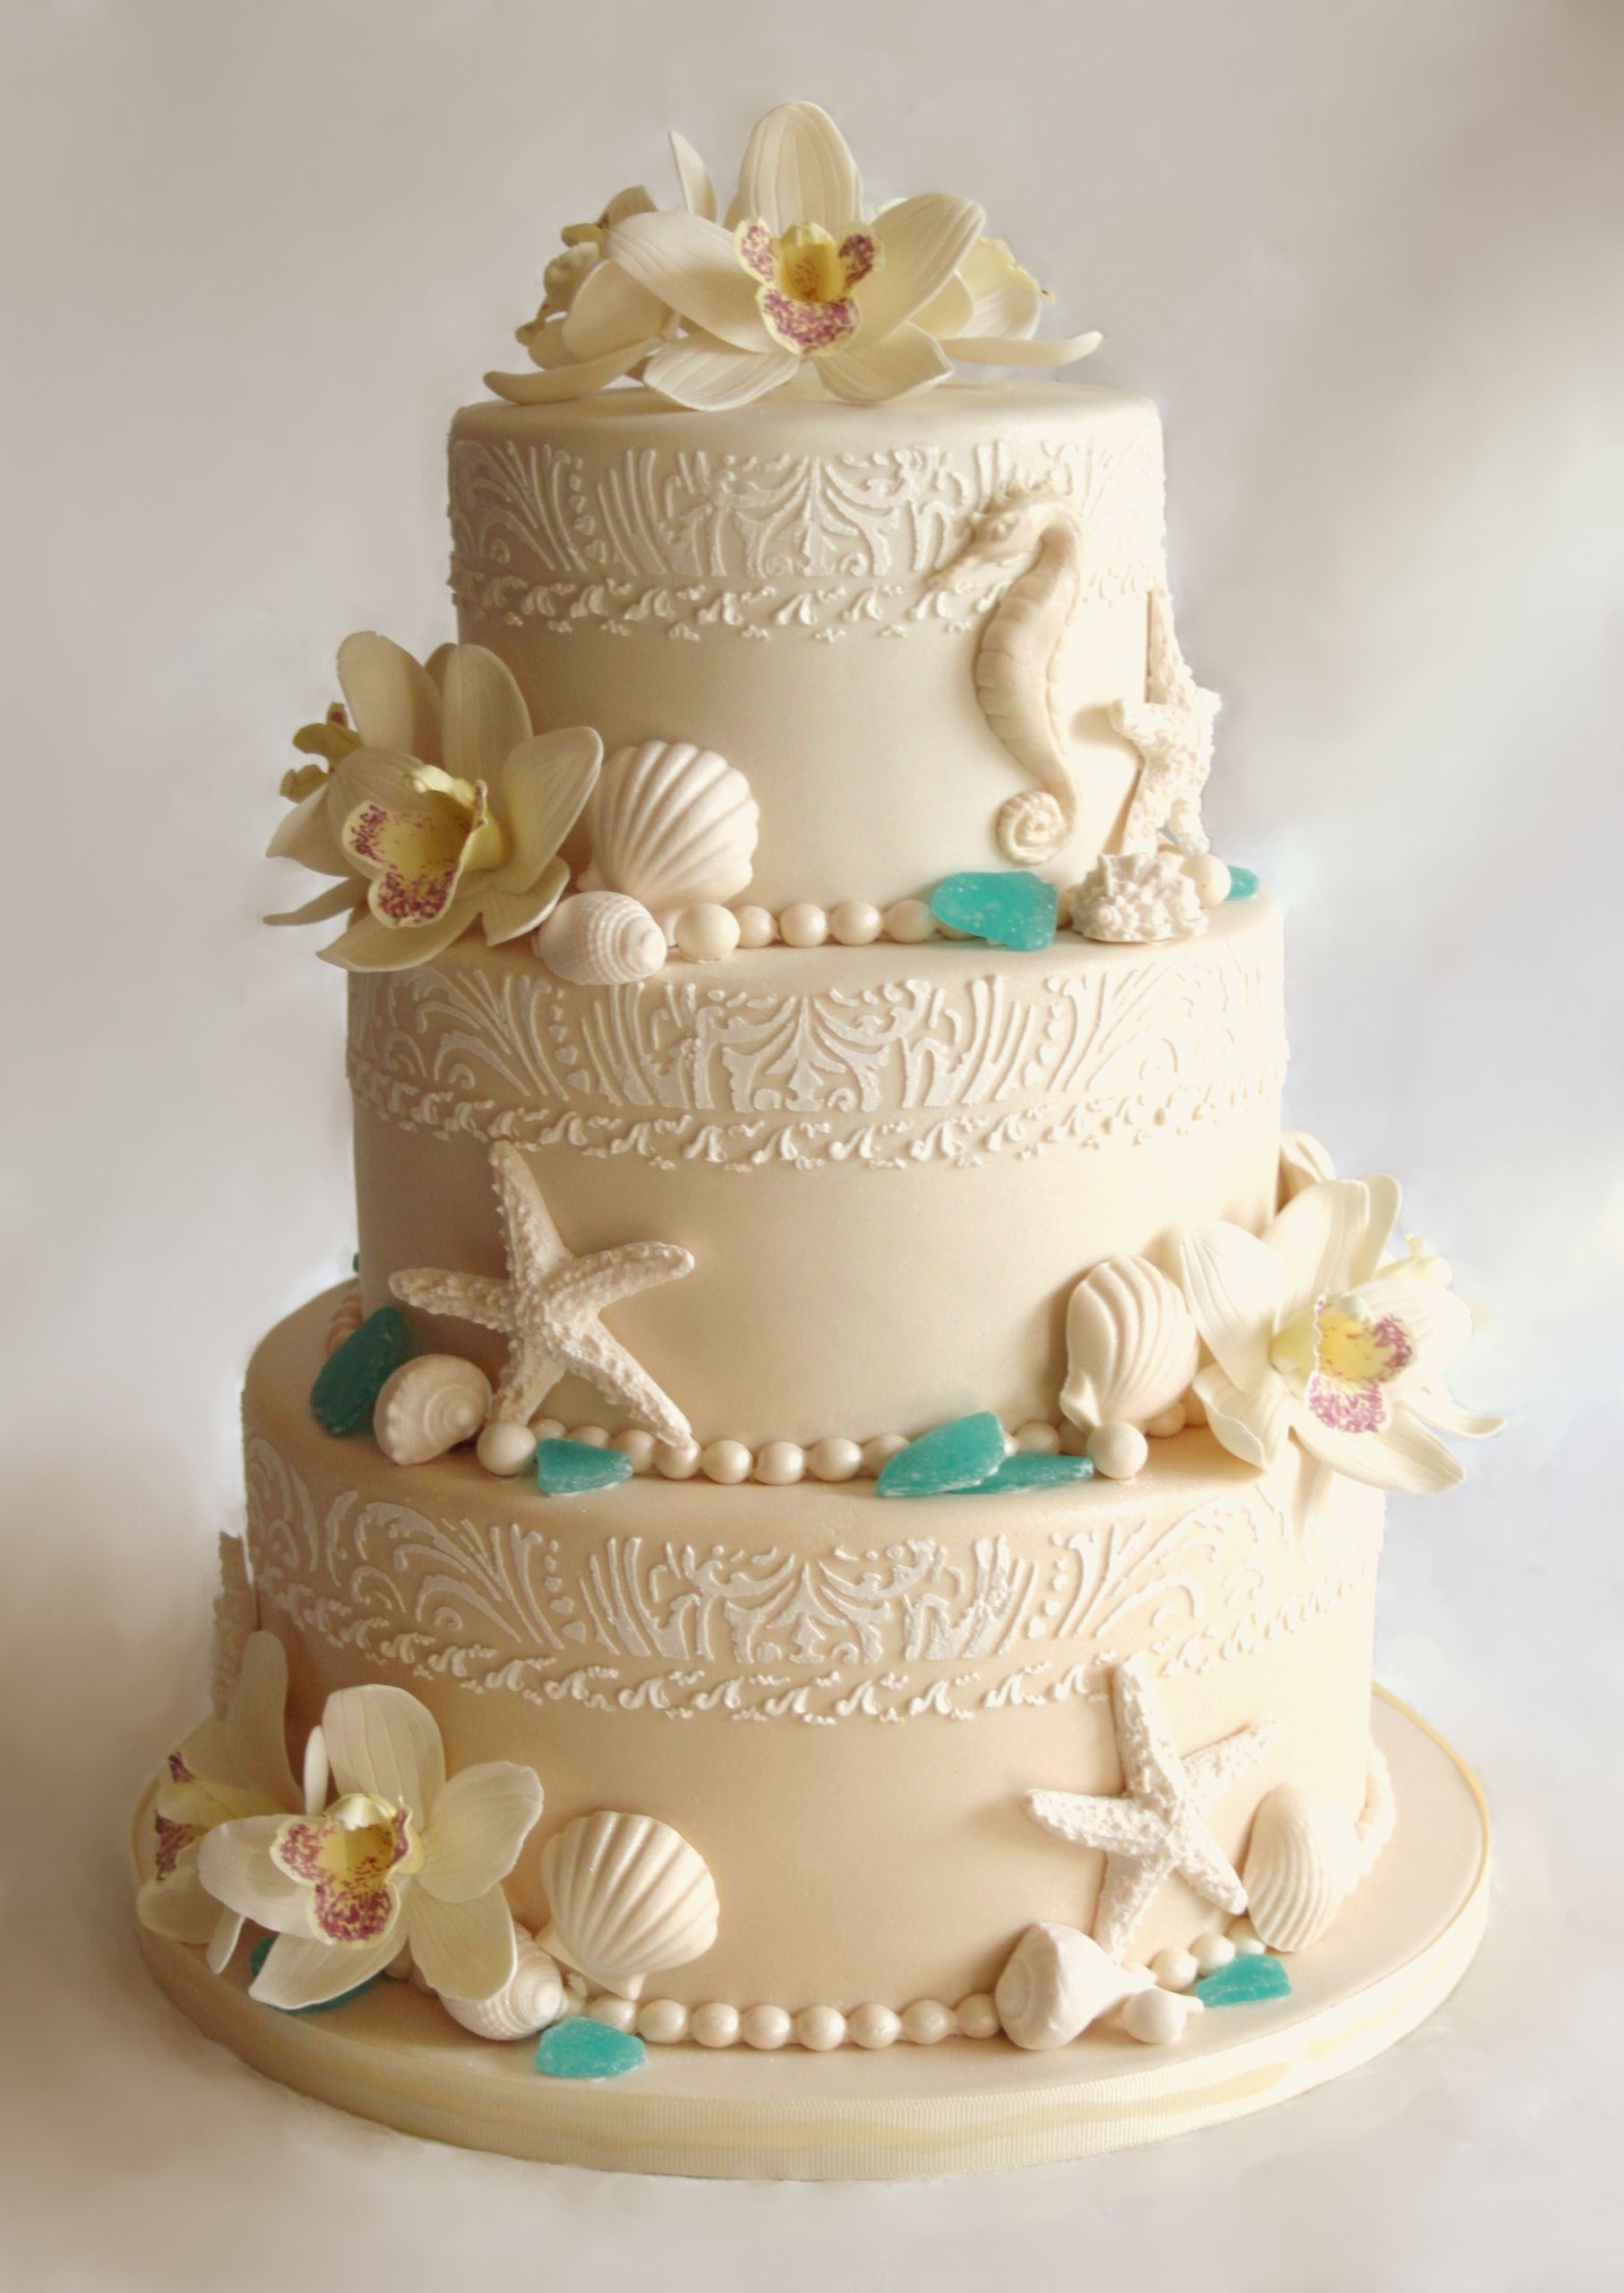 Beach Wedding Cake Ideas
 30 ULTIMATE WEDDING CAKES TO STEAL THE SHOW